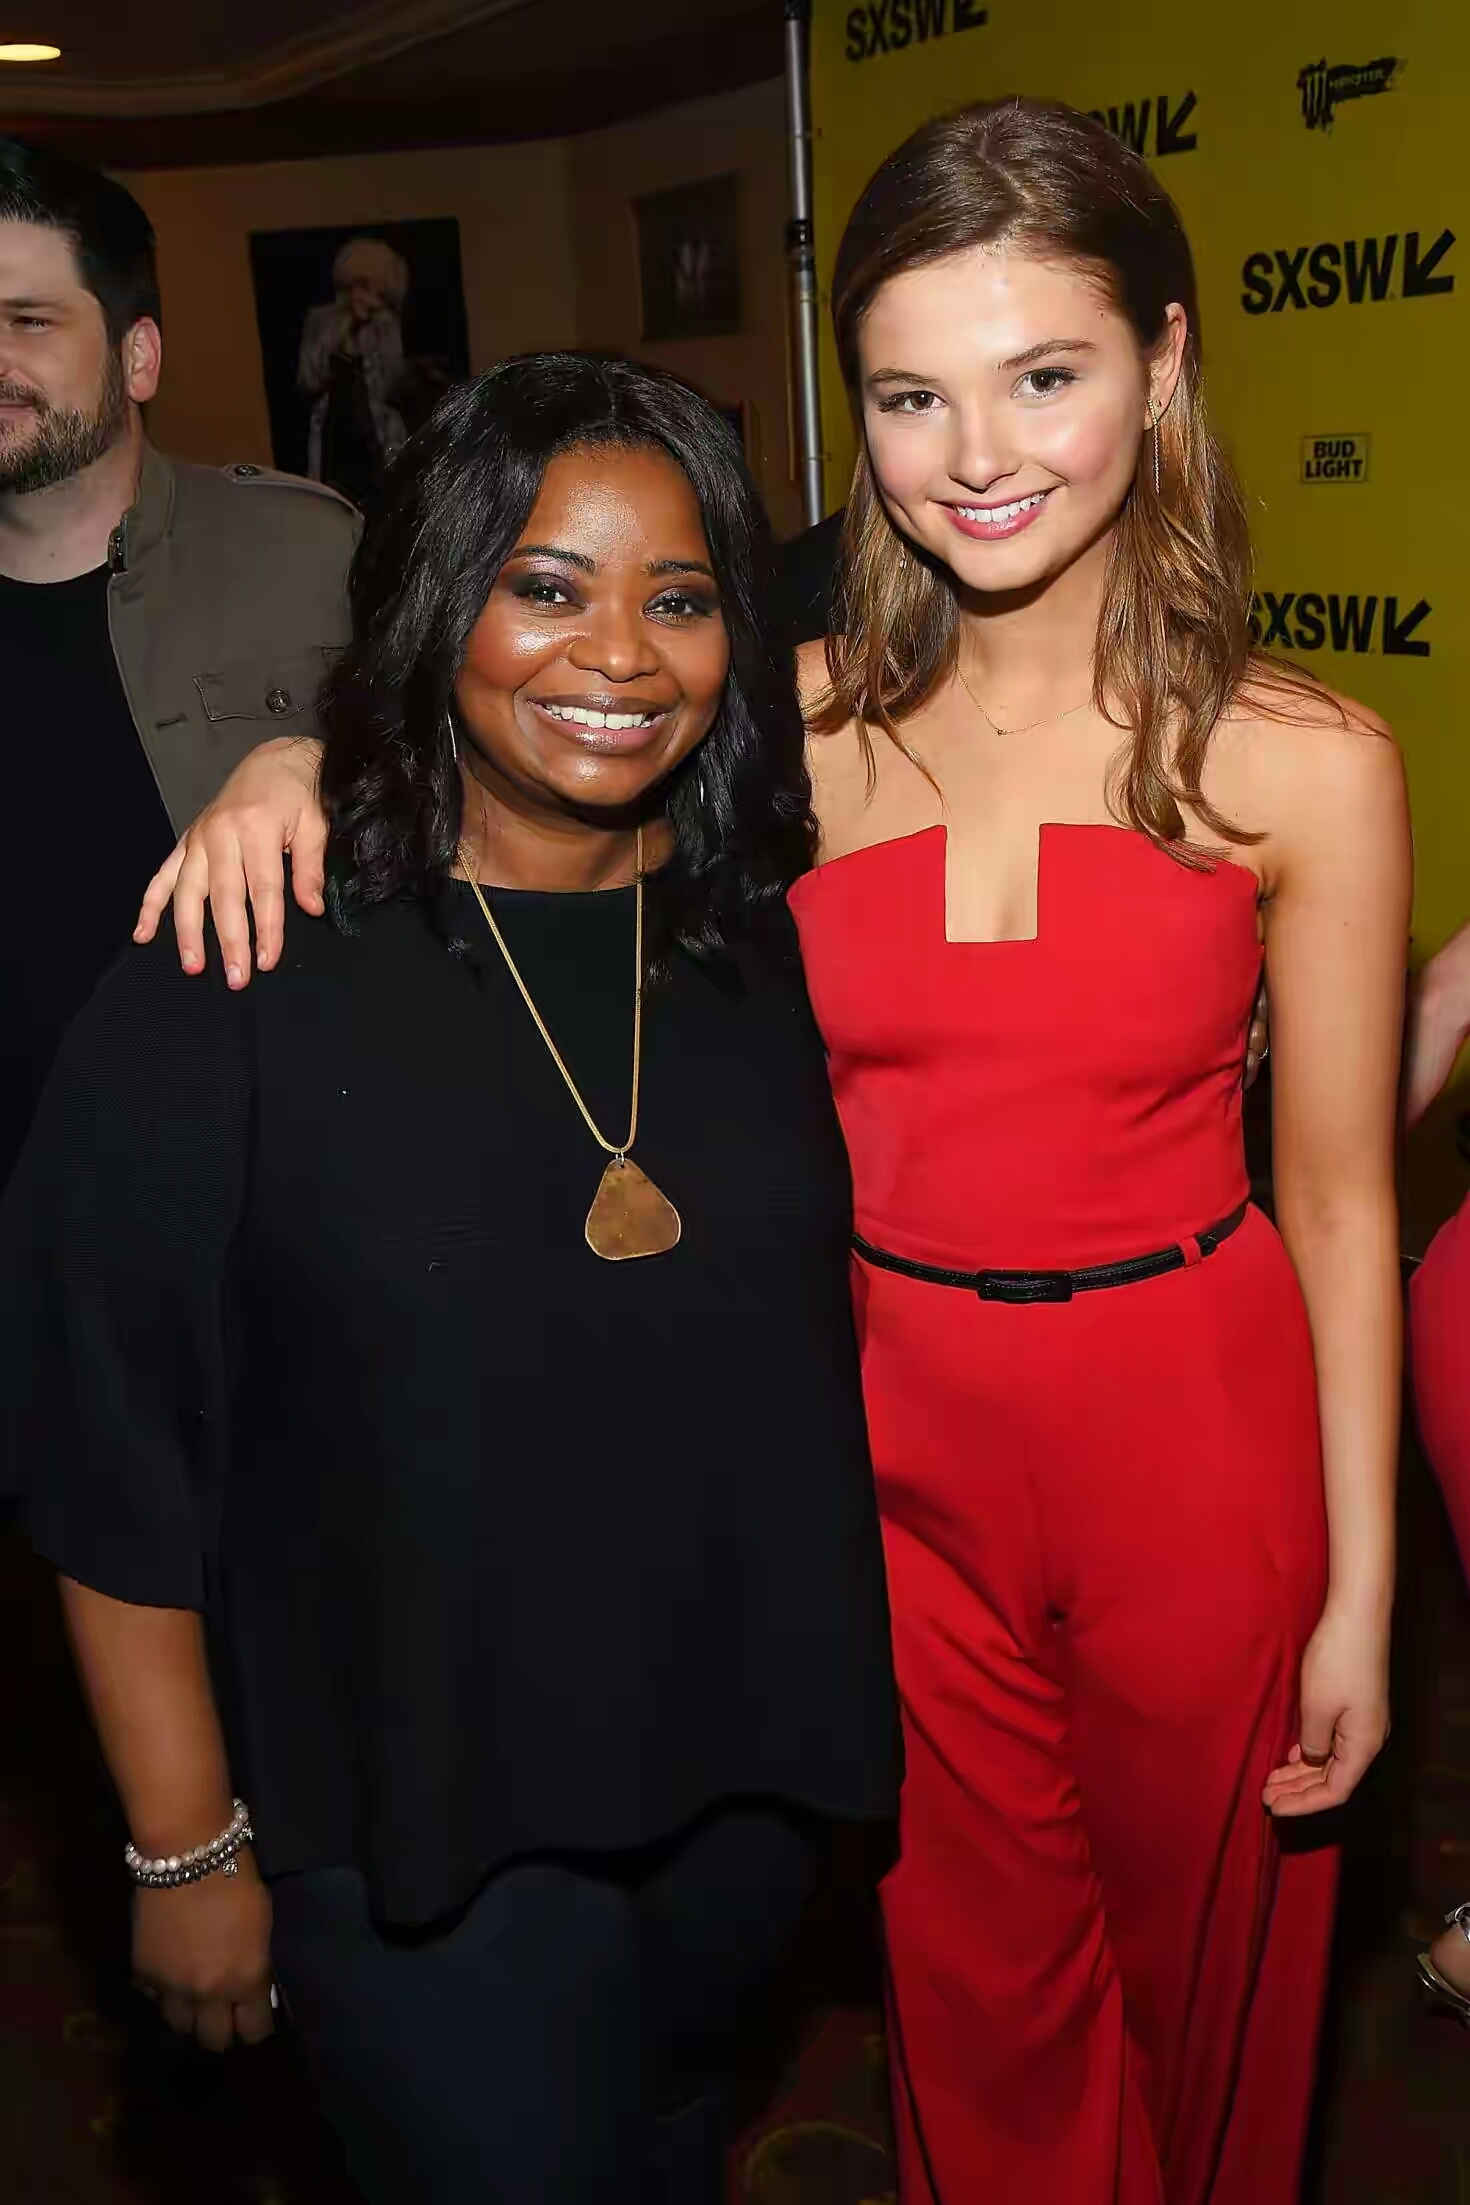 Stefanie Scott ステファニー スコット Small Town Crime Premiere After Party At 17 Sxsw Festival In Austin March 11 海外セレブ ハリウッド女優 画像ニュース最新版